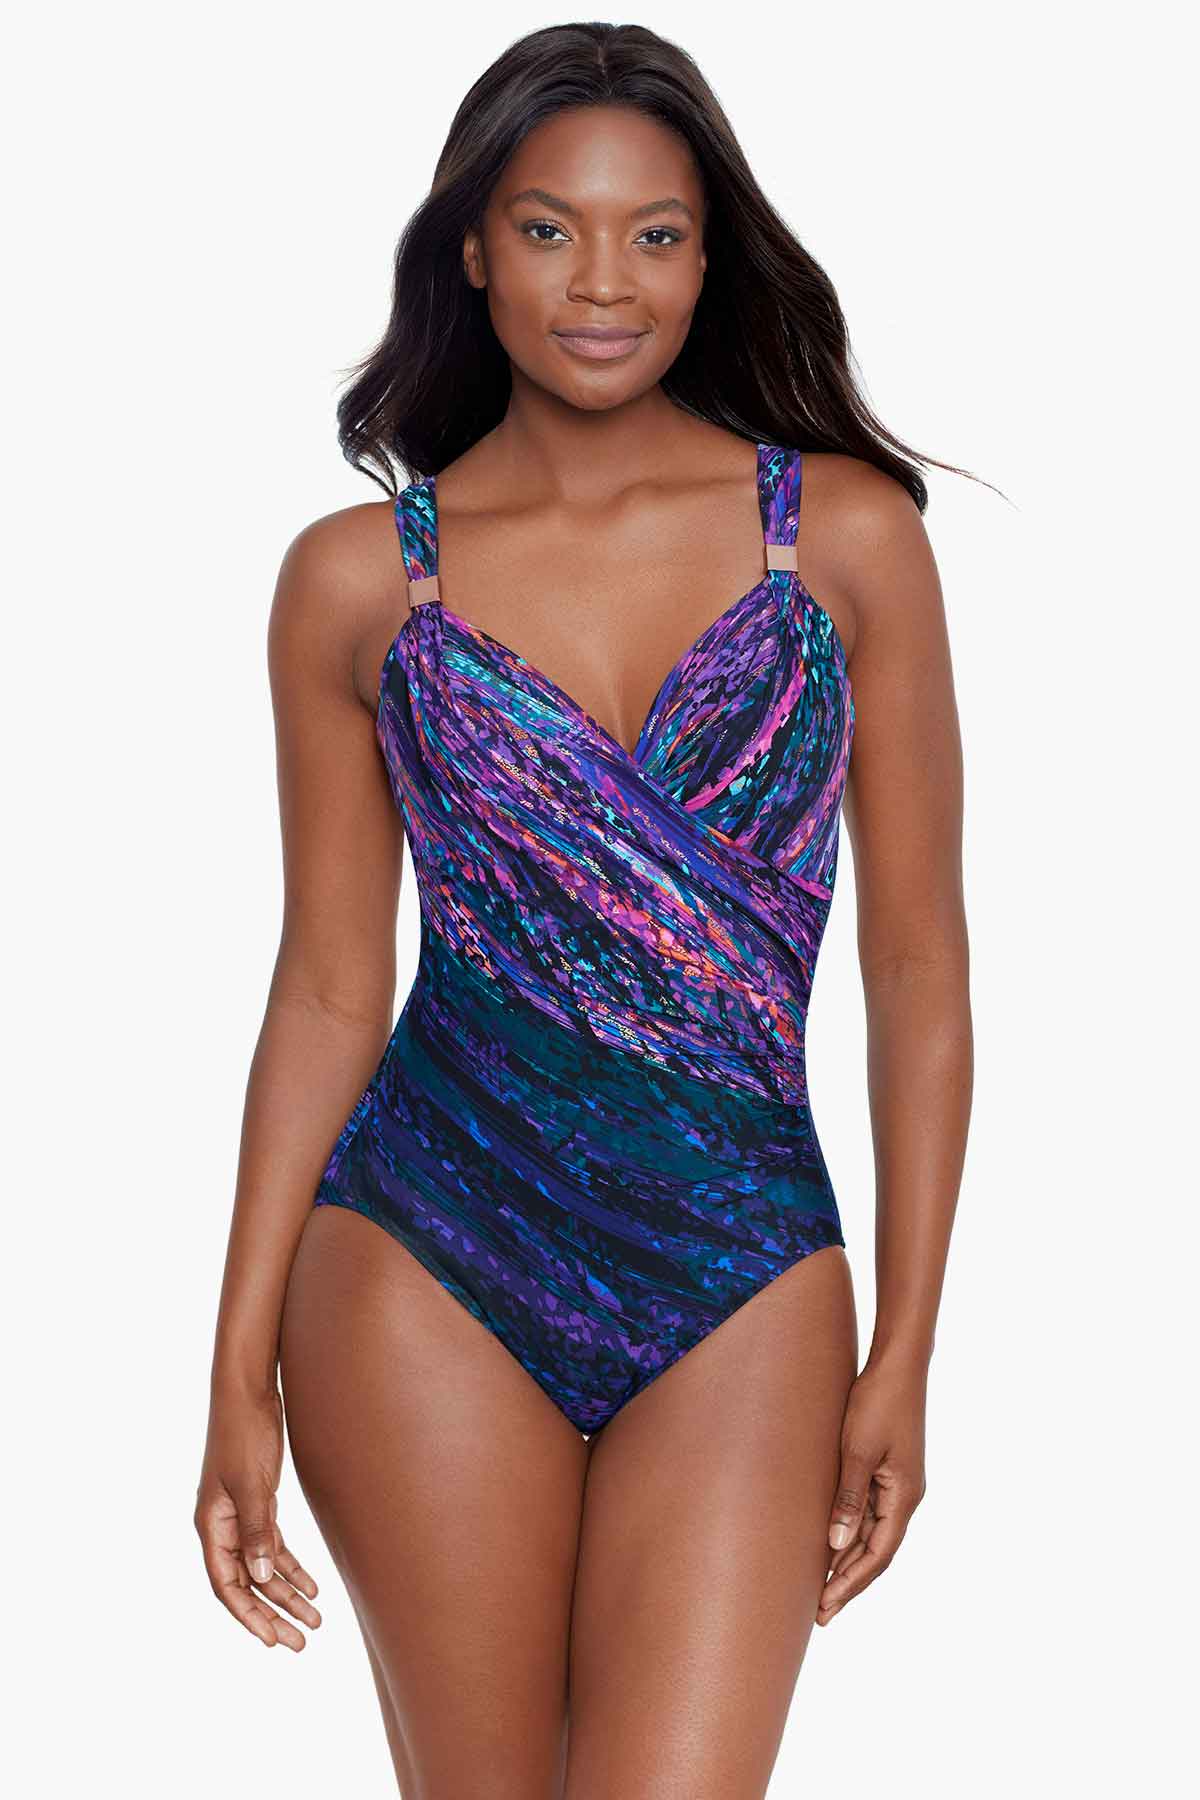 Women's Miraclesuit Swimsuits